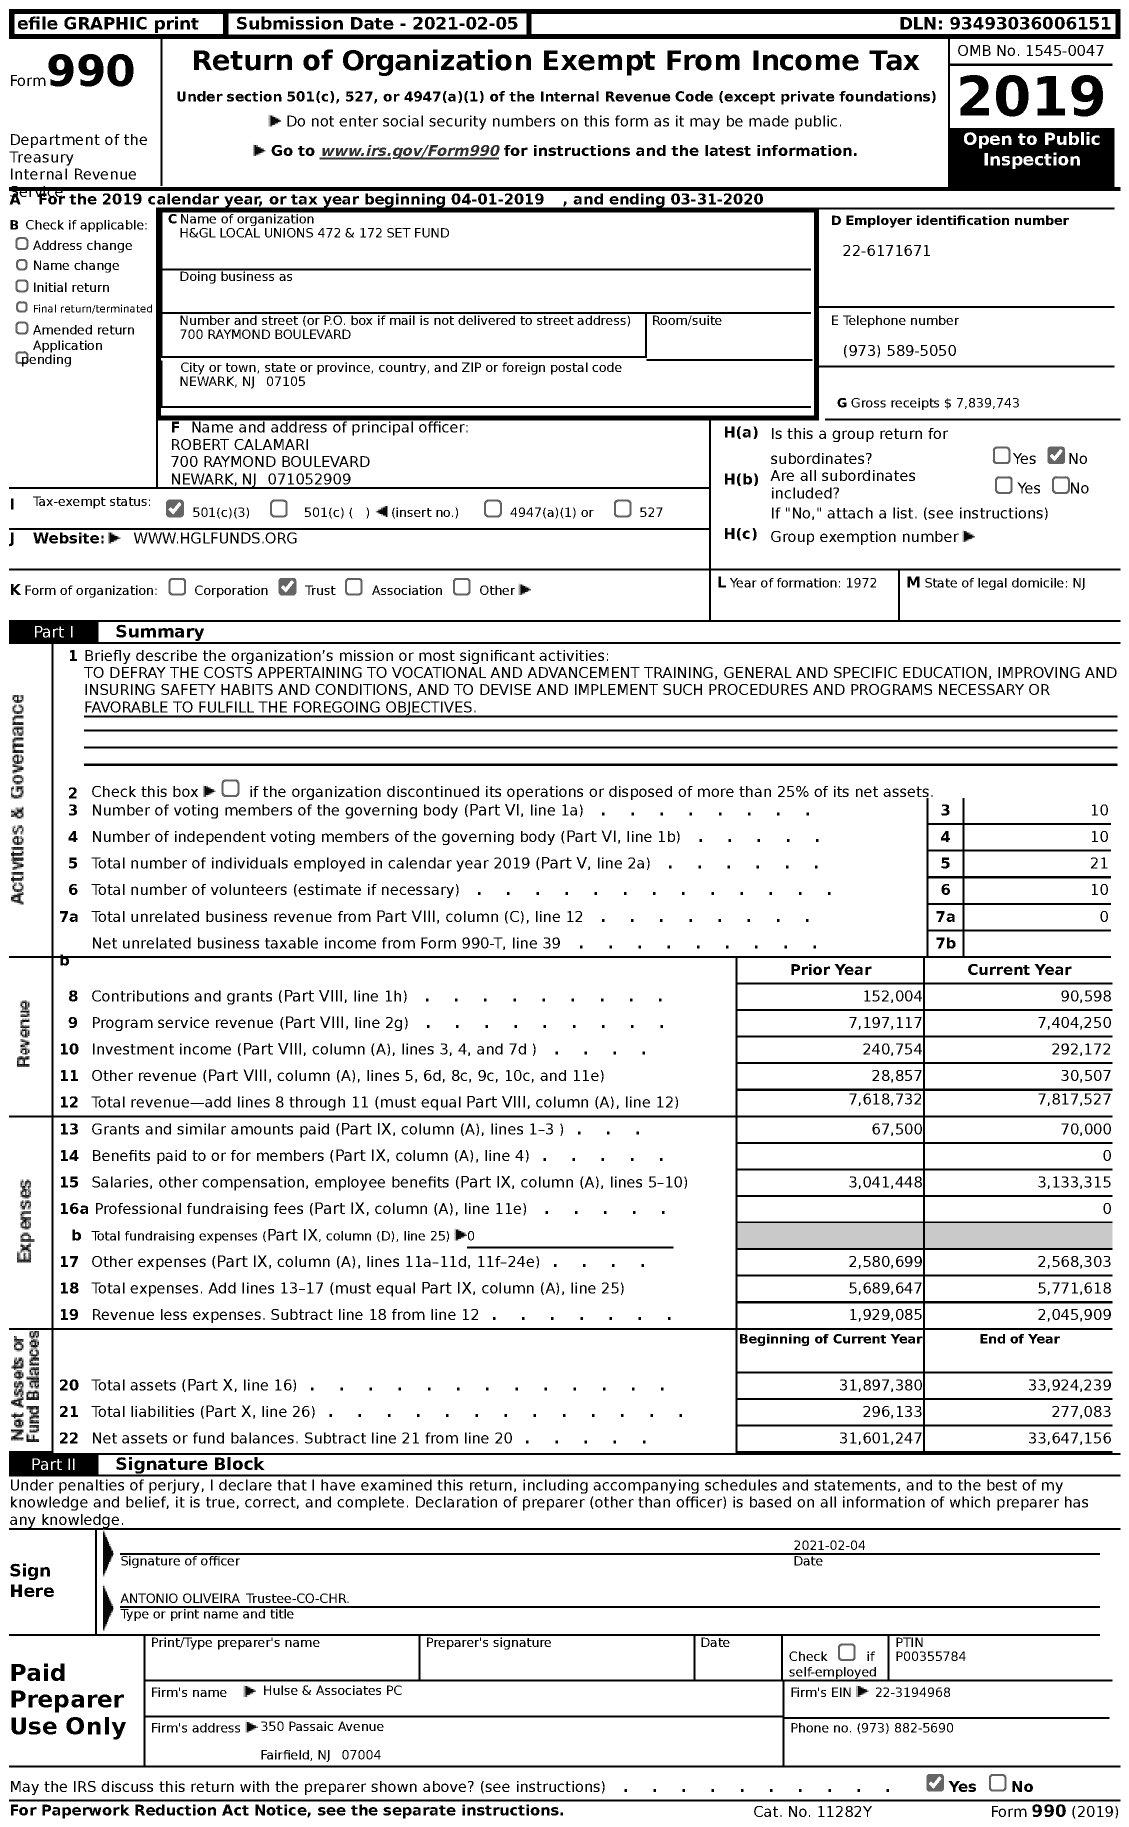 Image of first page of 2019 Form 990 for Heavy and General Laborers' Local Unions 472 and 172 Safety Education and Training Fund Set Fund